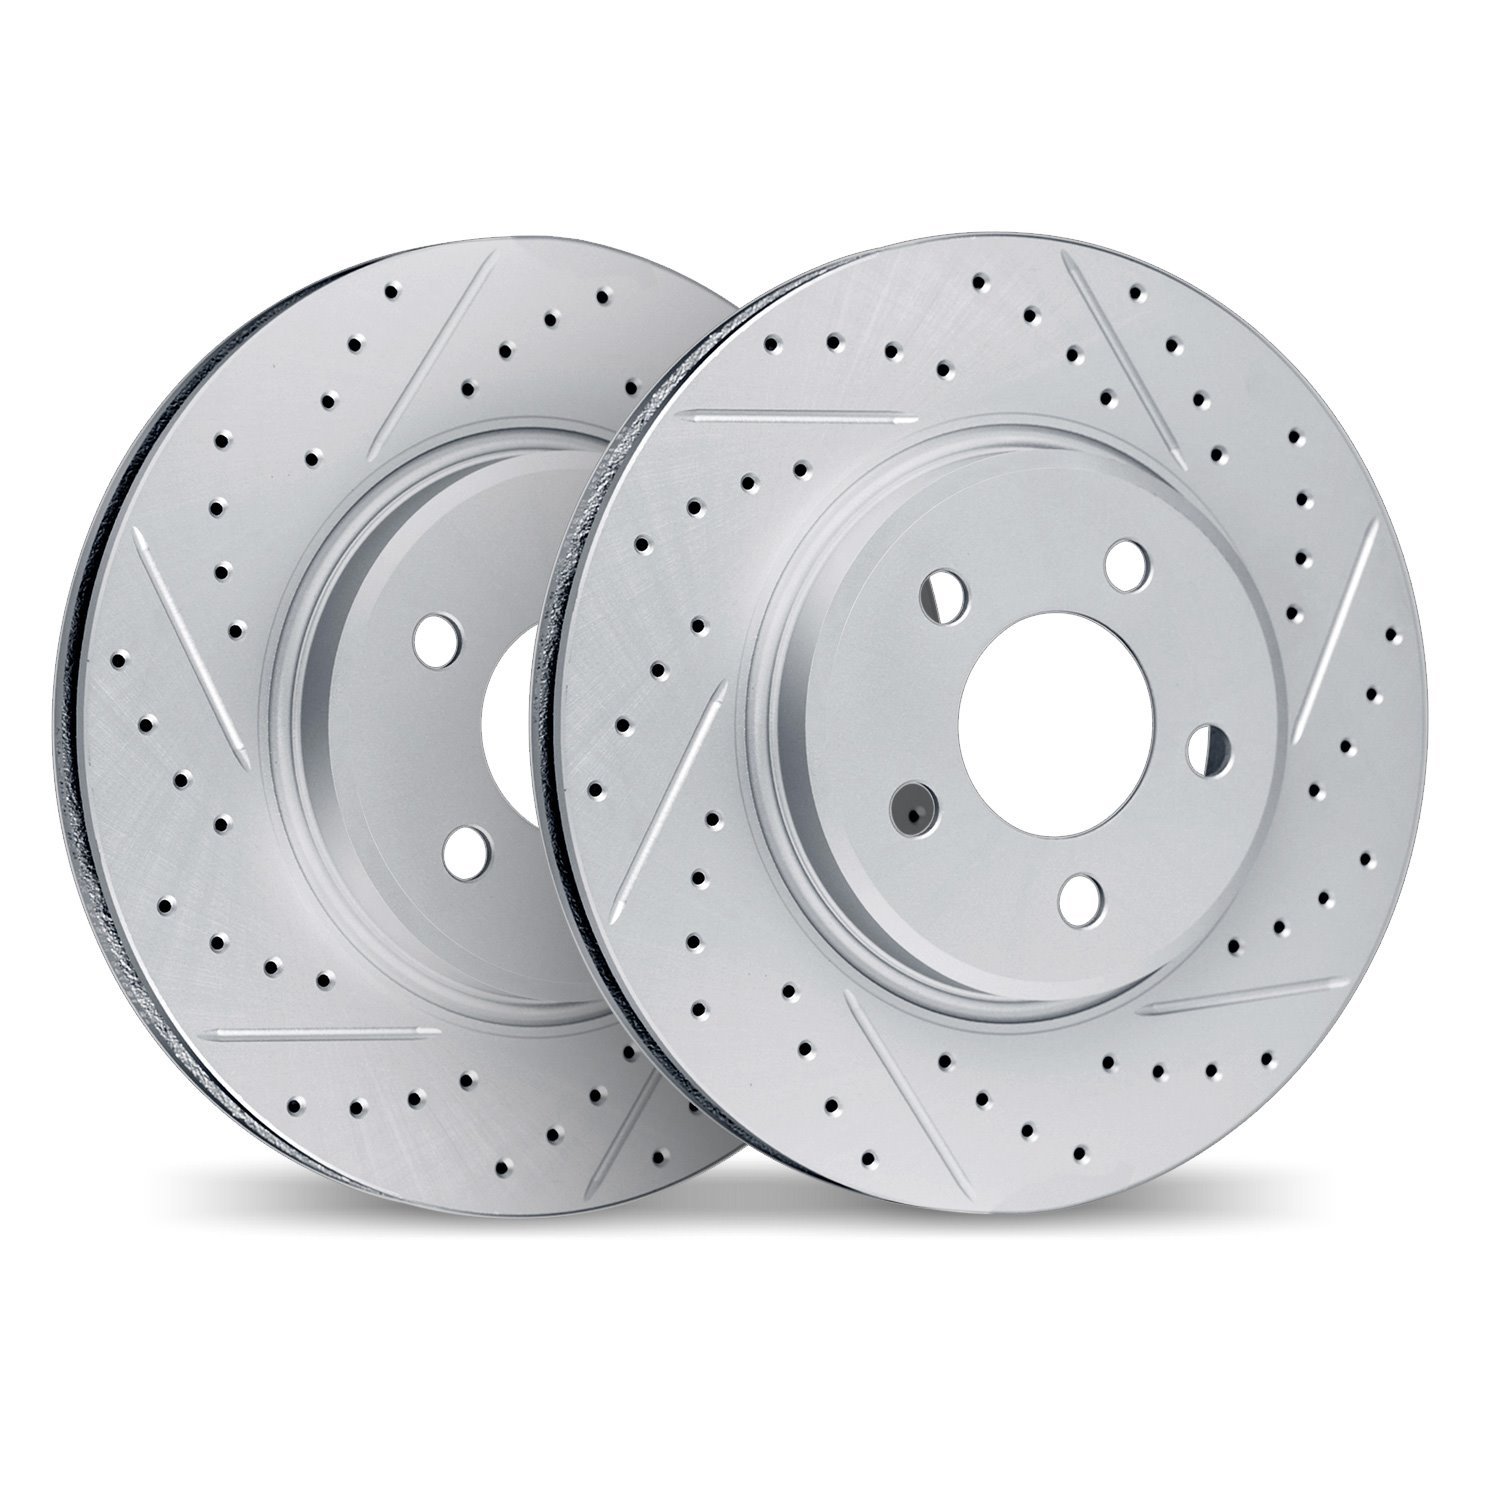 2002-31001 Geoperformance Drilled/Slotted Brake Rotors, 2006-2013 BMW, Position: Front